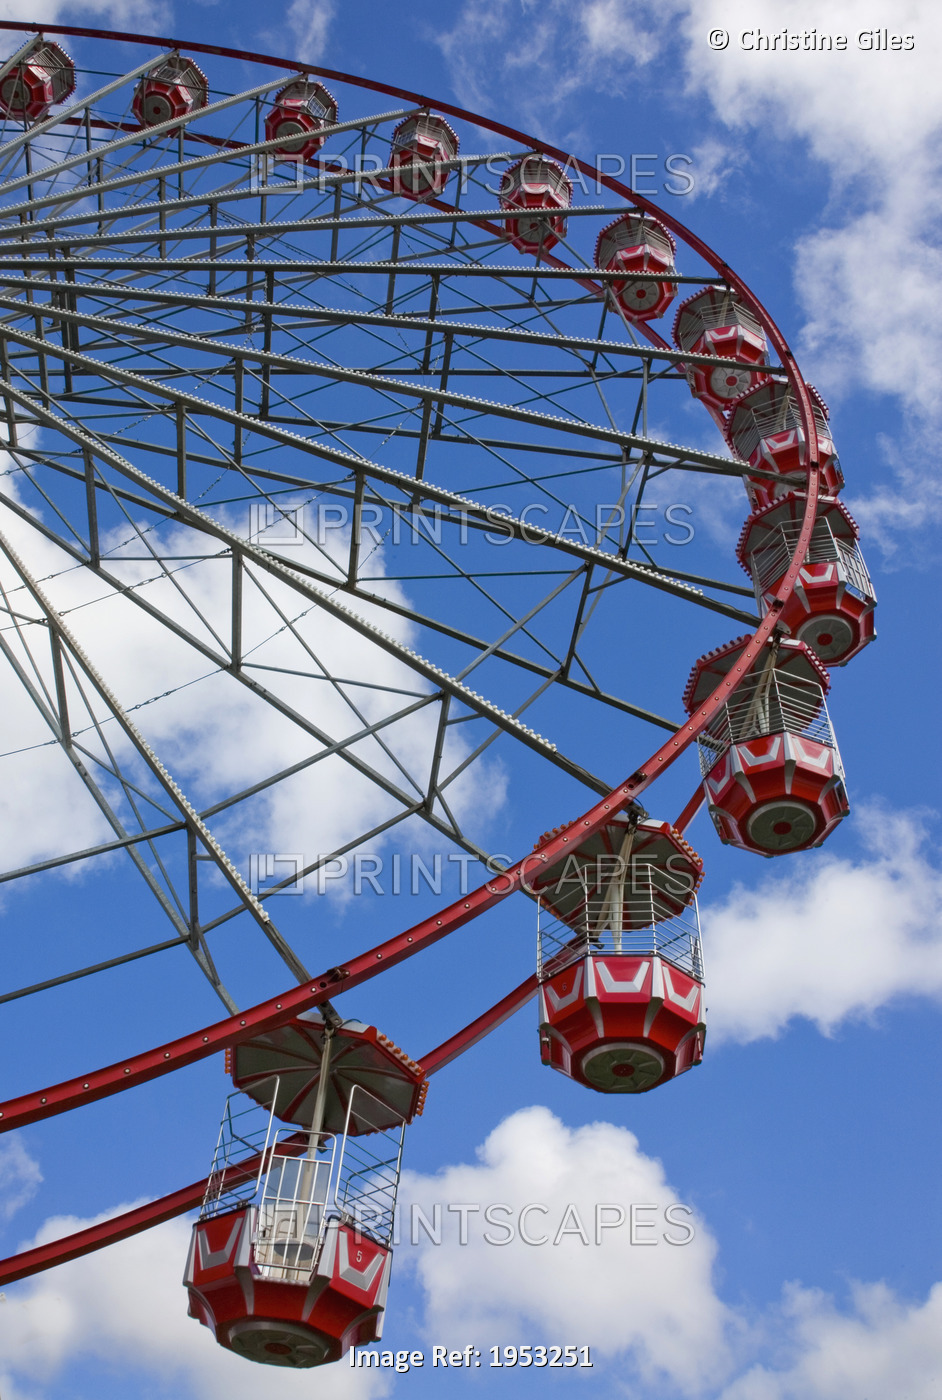 A Large Red Ferris Wheel; Newcastle Upon Tyne, England